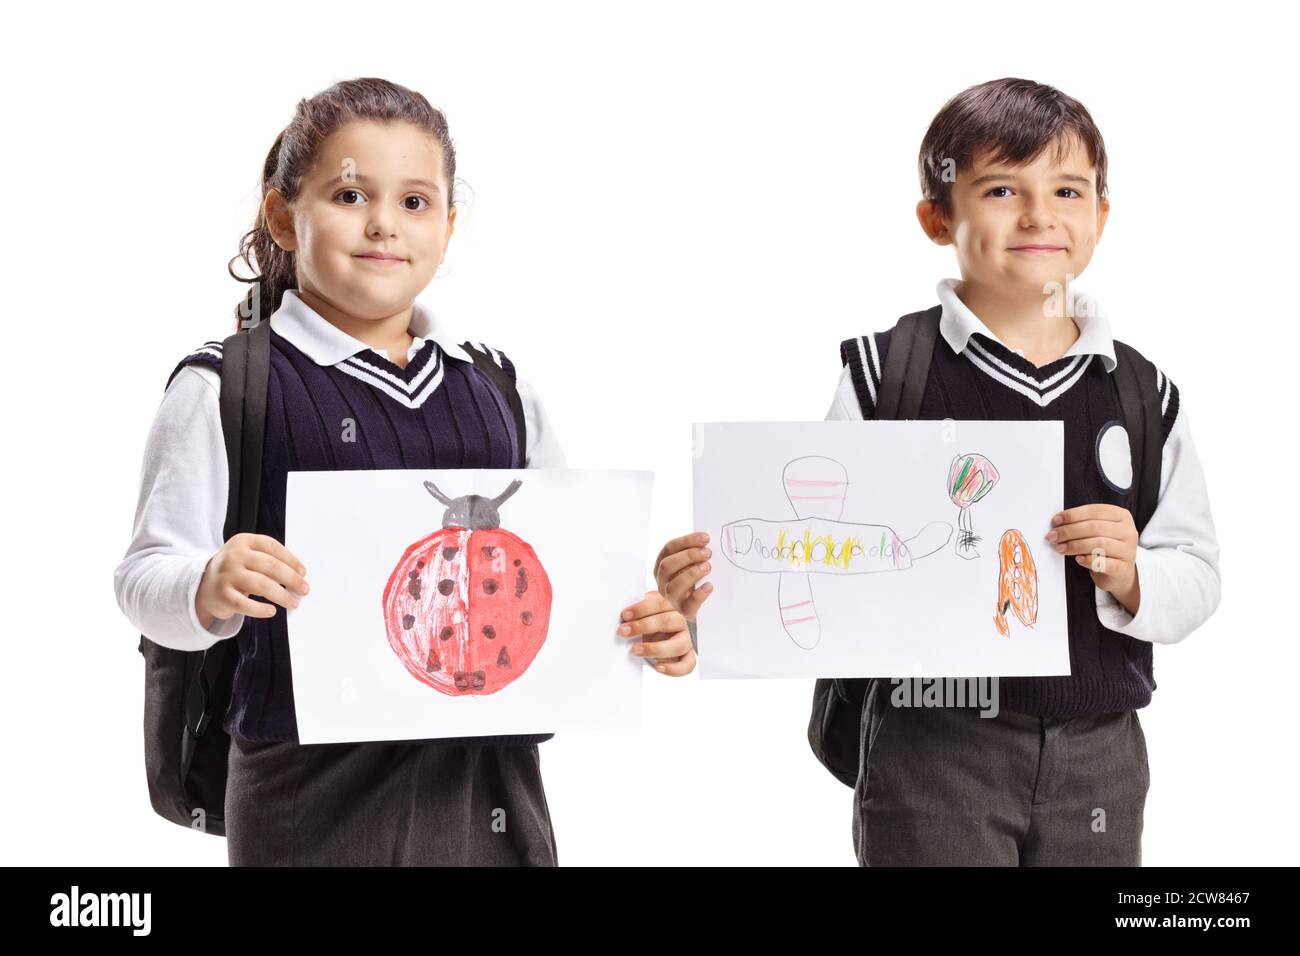 Full length portrait of a schoolchildren in uniforms holding drawings isolated on white background Stock Photo